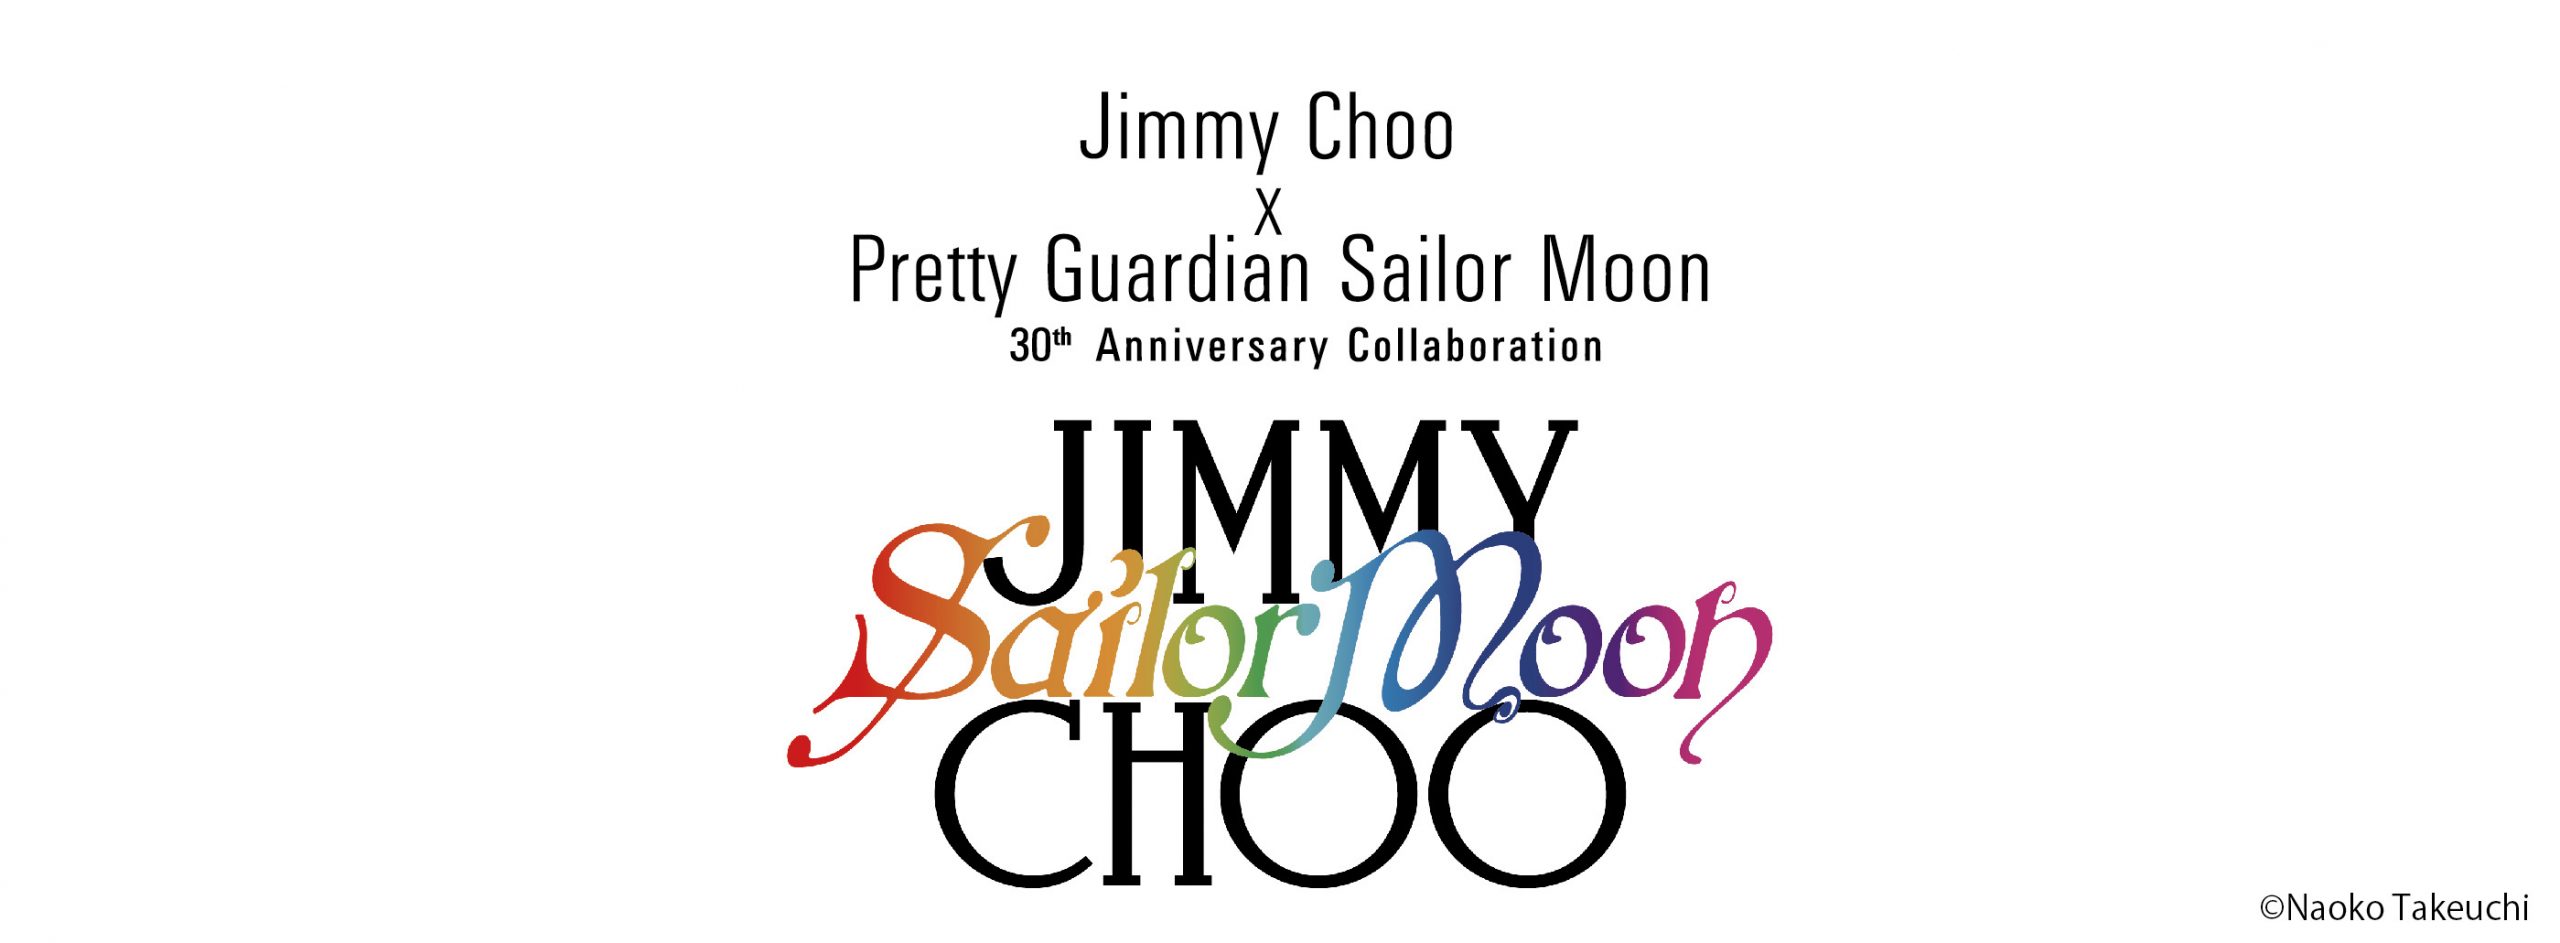 Jimmy Choo Designs $13,000 Sailor Moon Crystal Boots to Mark the